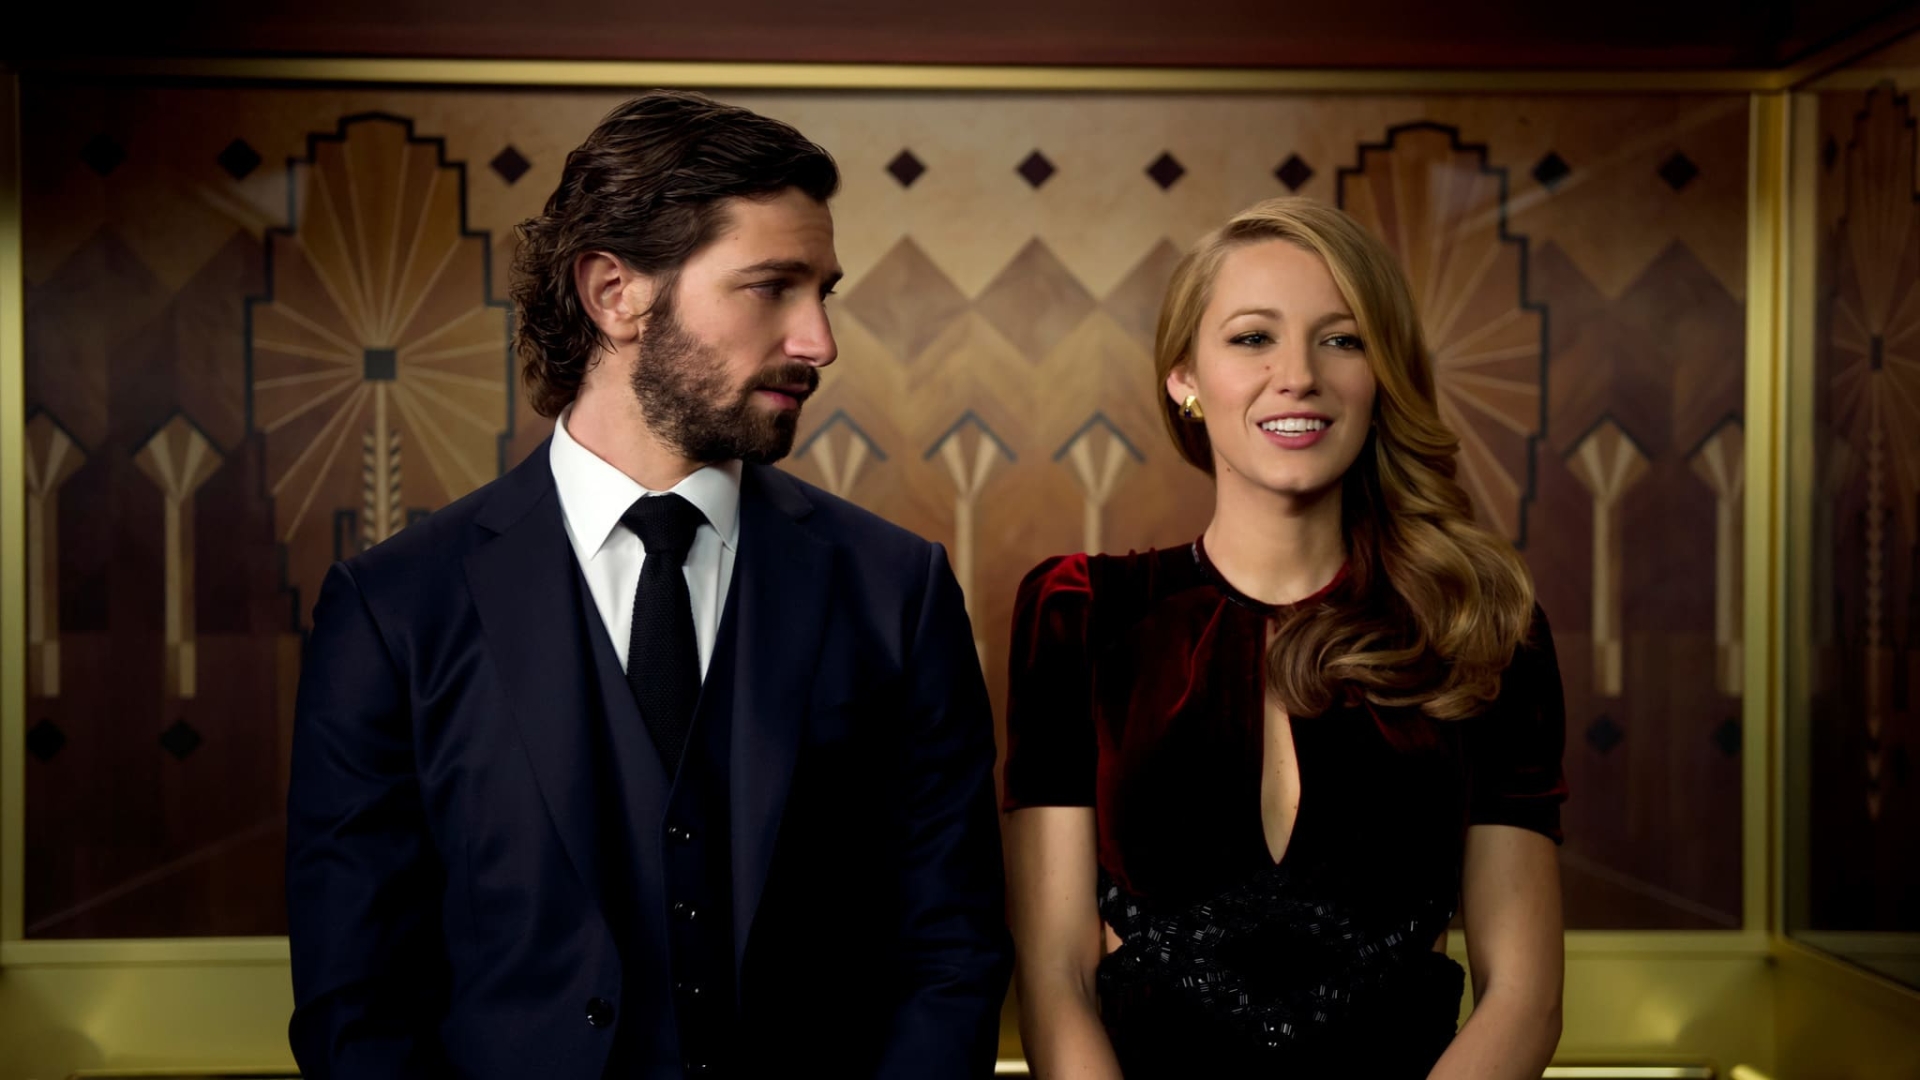 The Age of Adaline (The Age of Adaline)